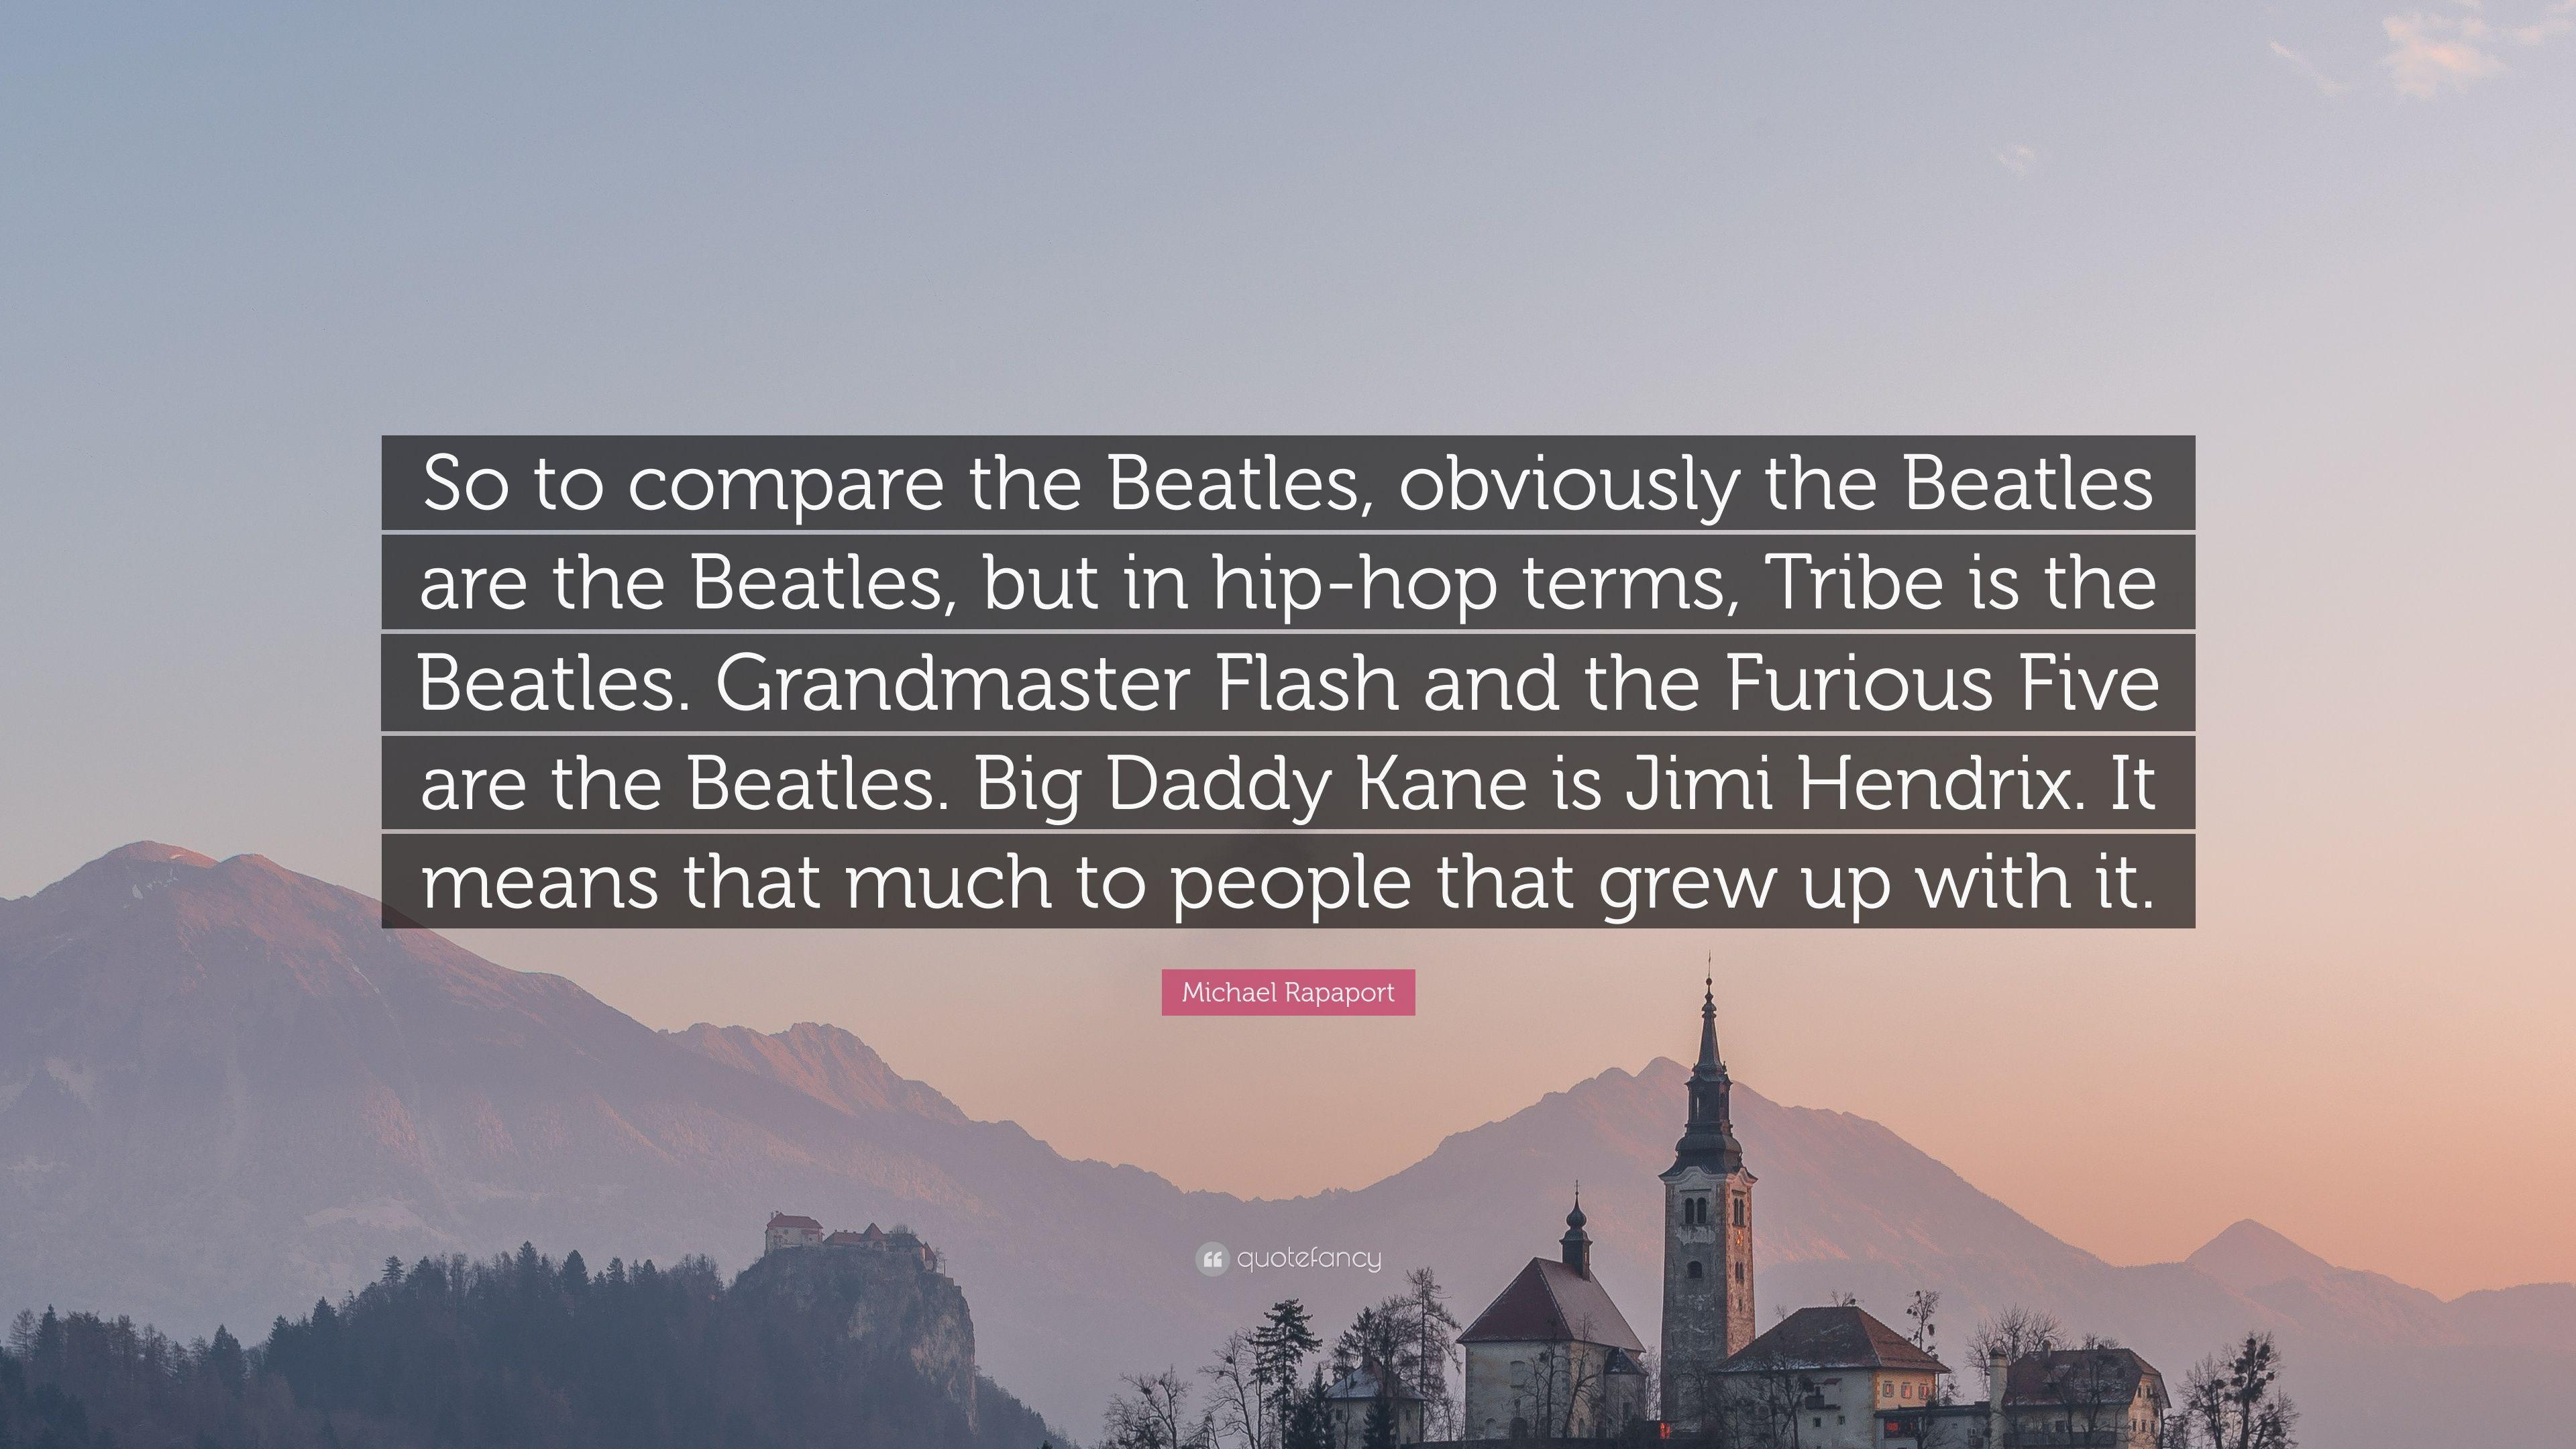 Michael Rapaport Quote: “So to compare the Beatles, obviously